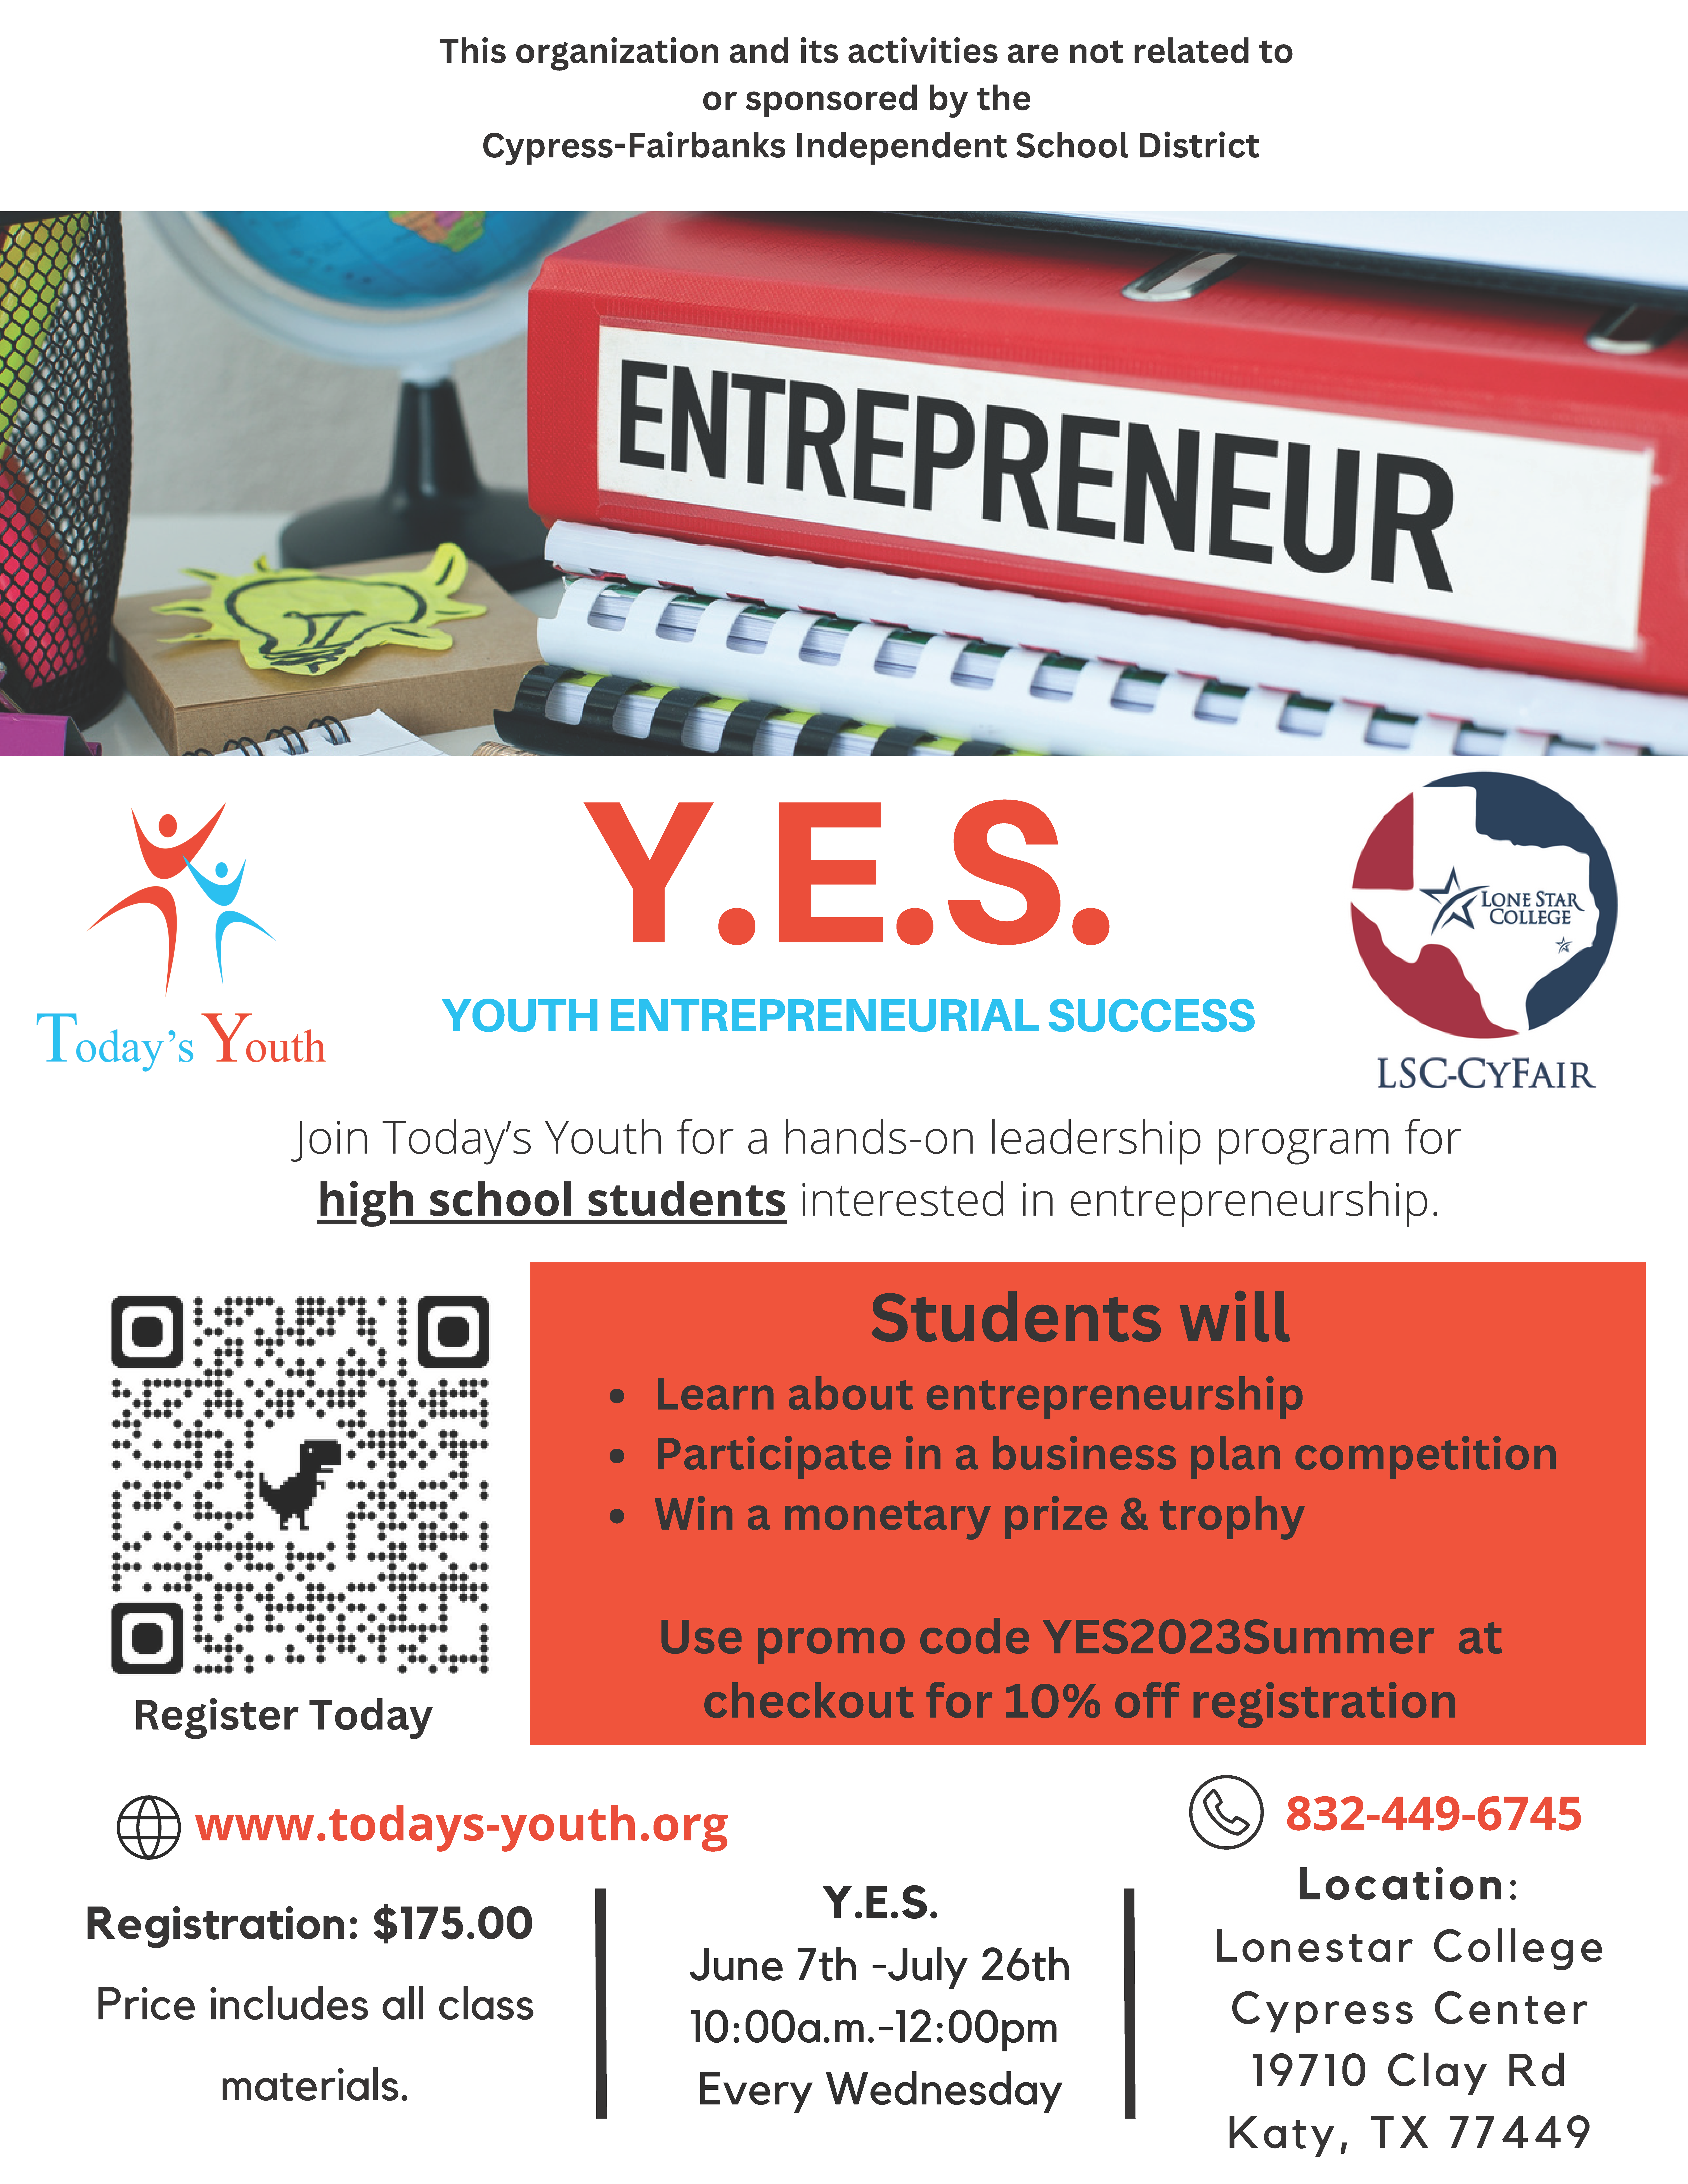 Youth Entrepreneurial Success (Y.E.S.)  Join Today’s Youth for a hands-on leadership program for high school students interested in entrepreneurship.  Students will  learn about entrepreneurship. participate in a business plan competition. win a monetary prize and trophy.  JUne 7-July 26, every Wednesday 10 a.m.-12 p.m. Location: Lonestar College Cypress Center (19710 Clay Road, Katy, TX 77449) Course Fee: $175  www.todays-youth.org 832-449-6745